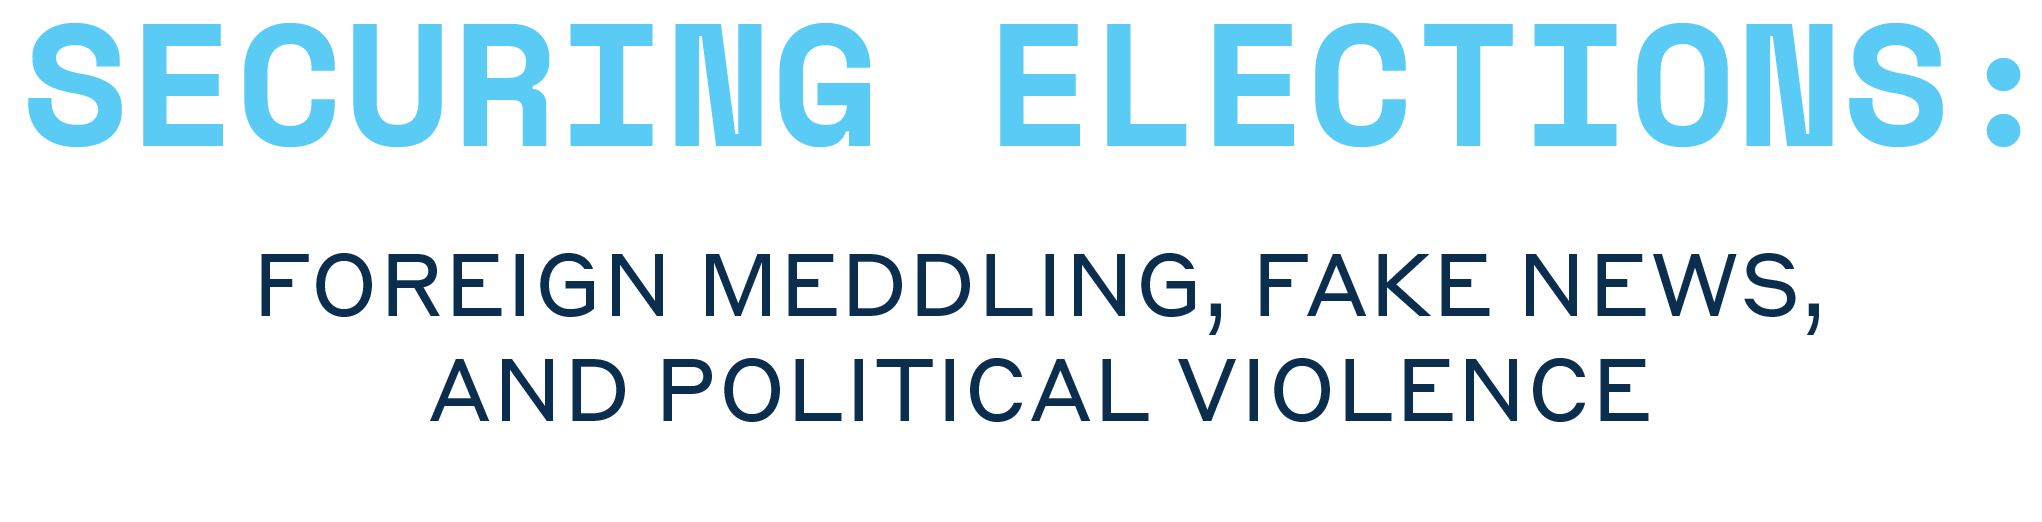 Securing Elections: Foreign Meddling, Fake News, and Political Violence